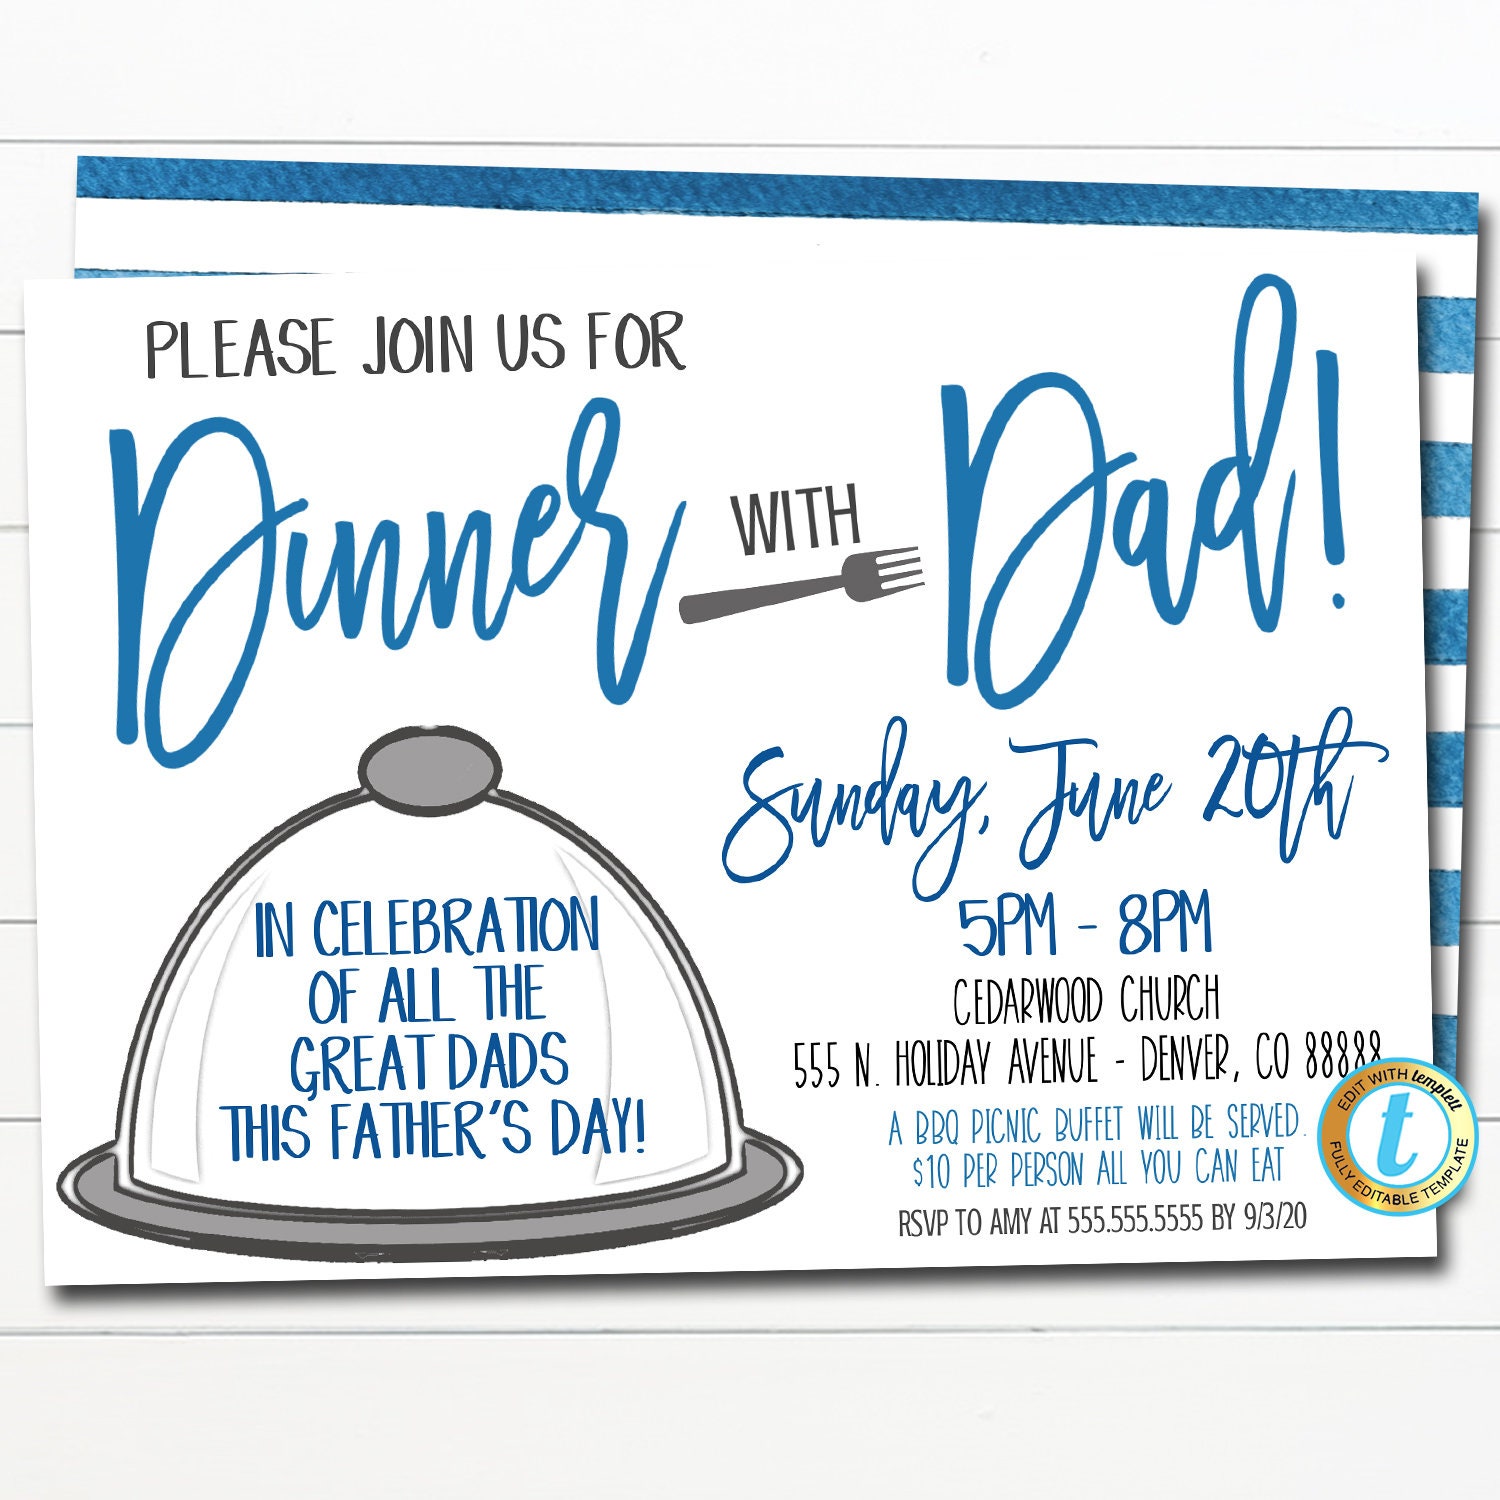 Yoghurt genezen som Dinner With Dad Invitation Father's Day Grill Out Event - Etsy